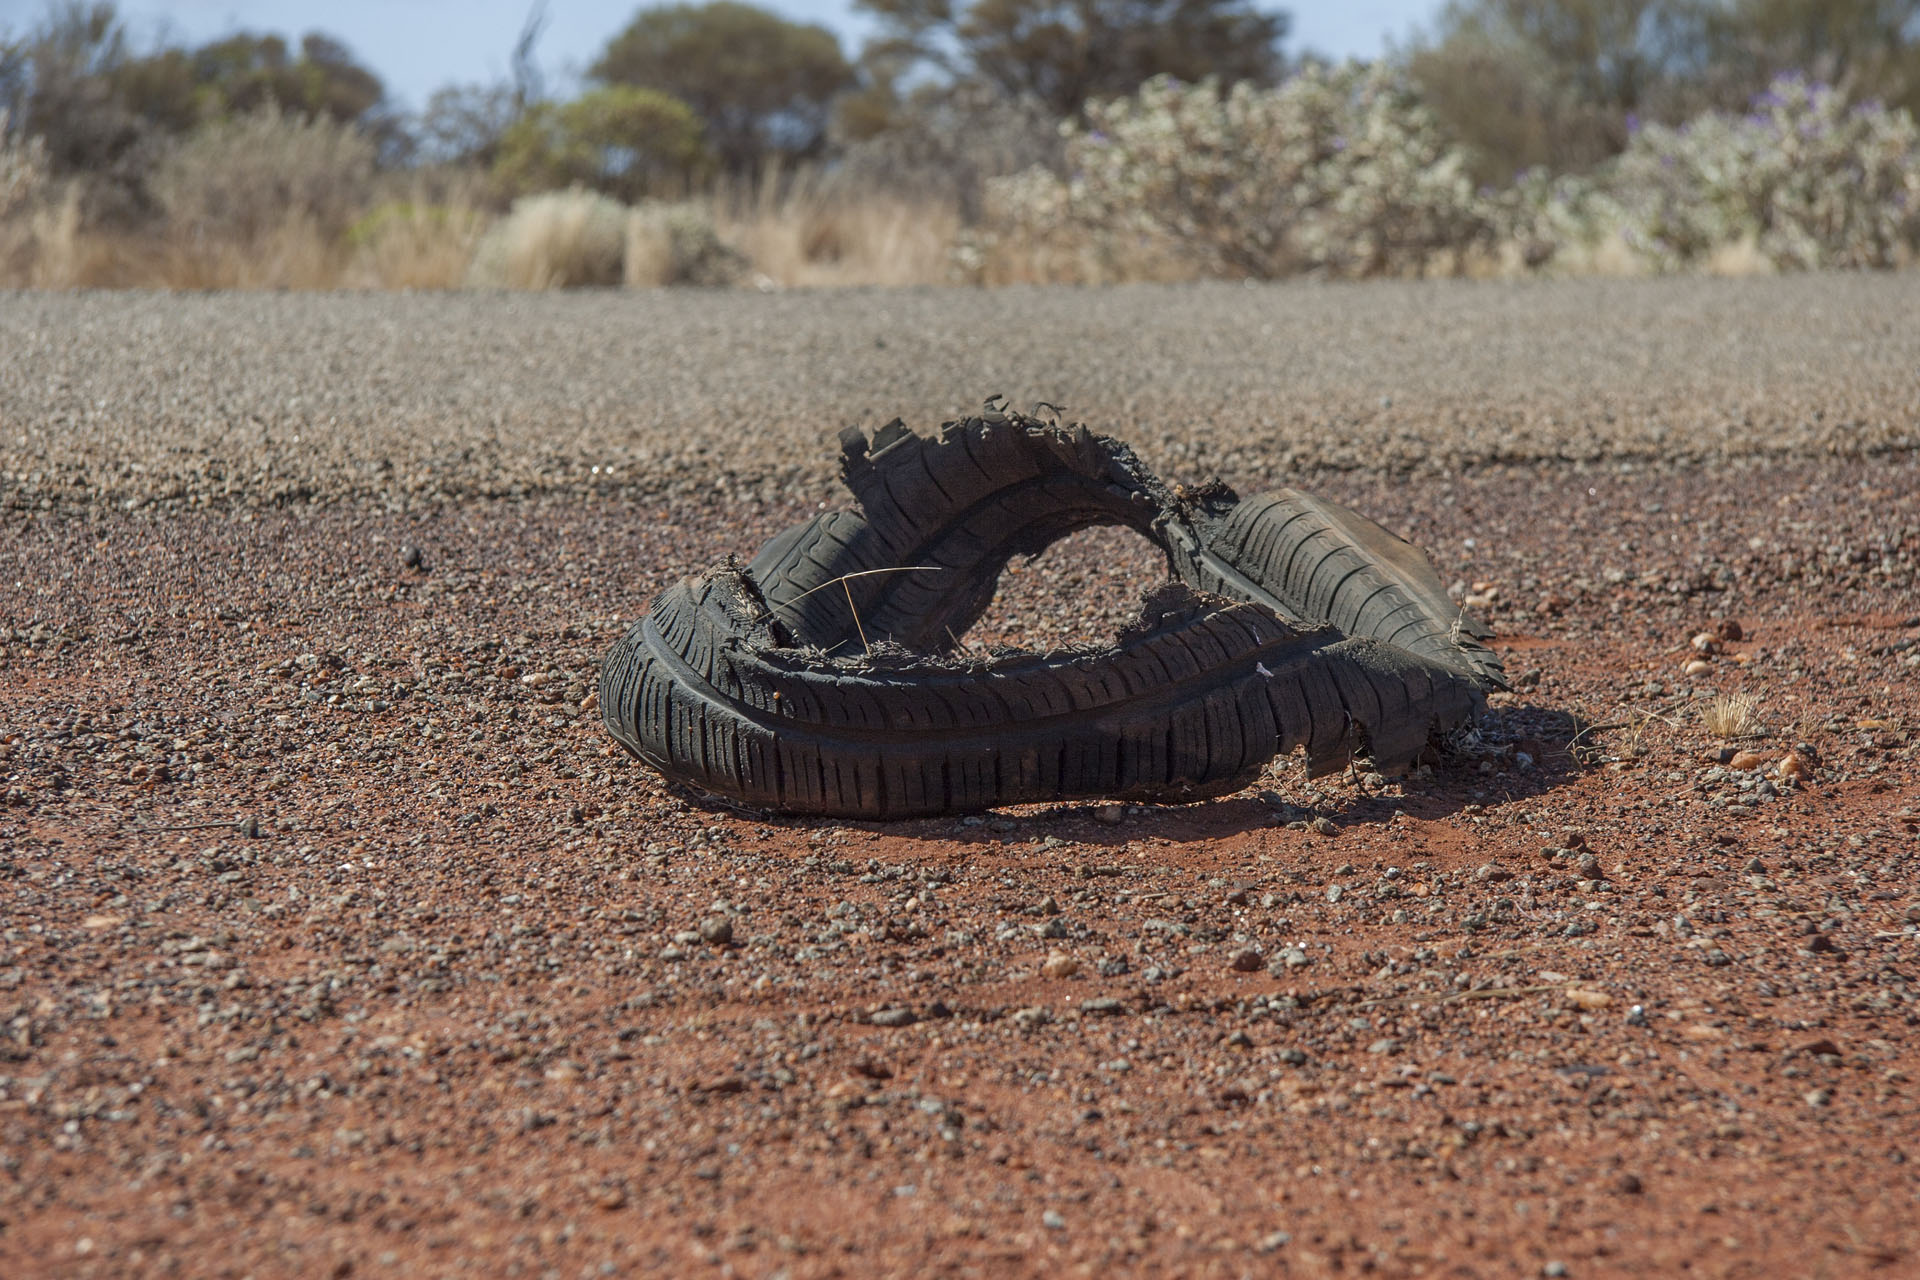 Busted tyres are not an uncommon sight on the road.